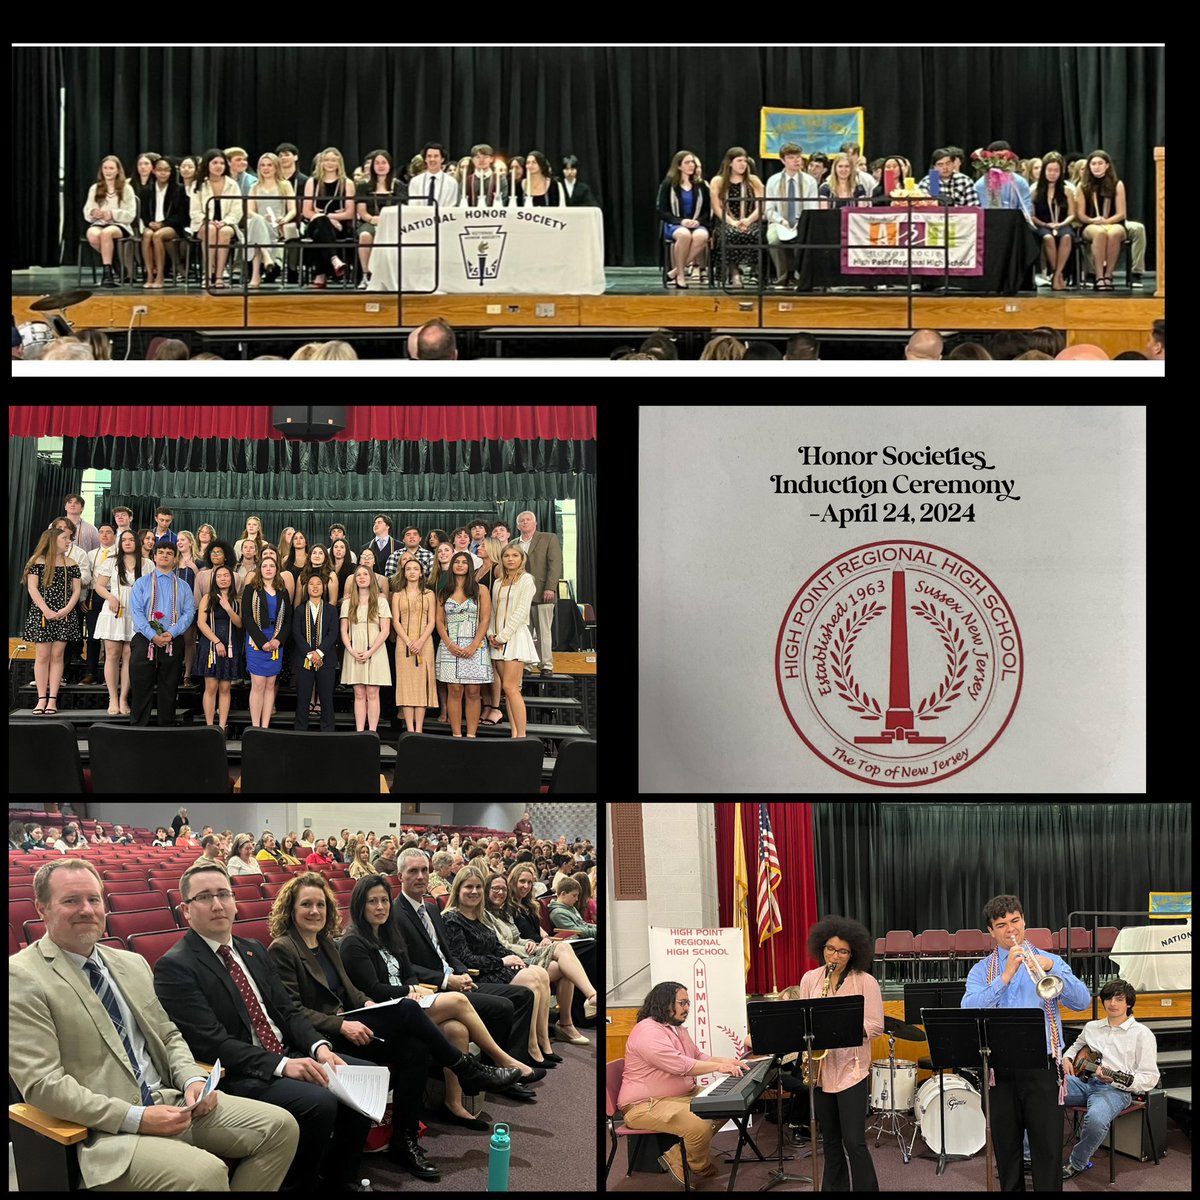 The @HPRwildcats Honor Societies Induction Ceremony was tonight. Congratulations to all of the new inductees! We are so proud of your accomplishments. @JonTallamy @SeamusWCampbell